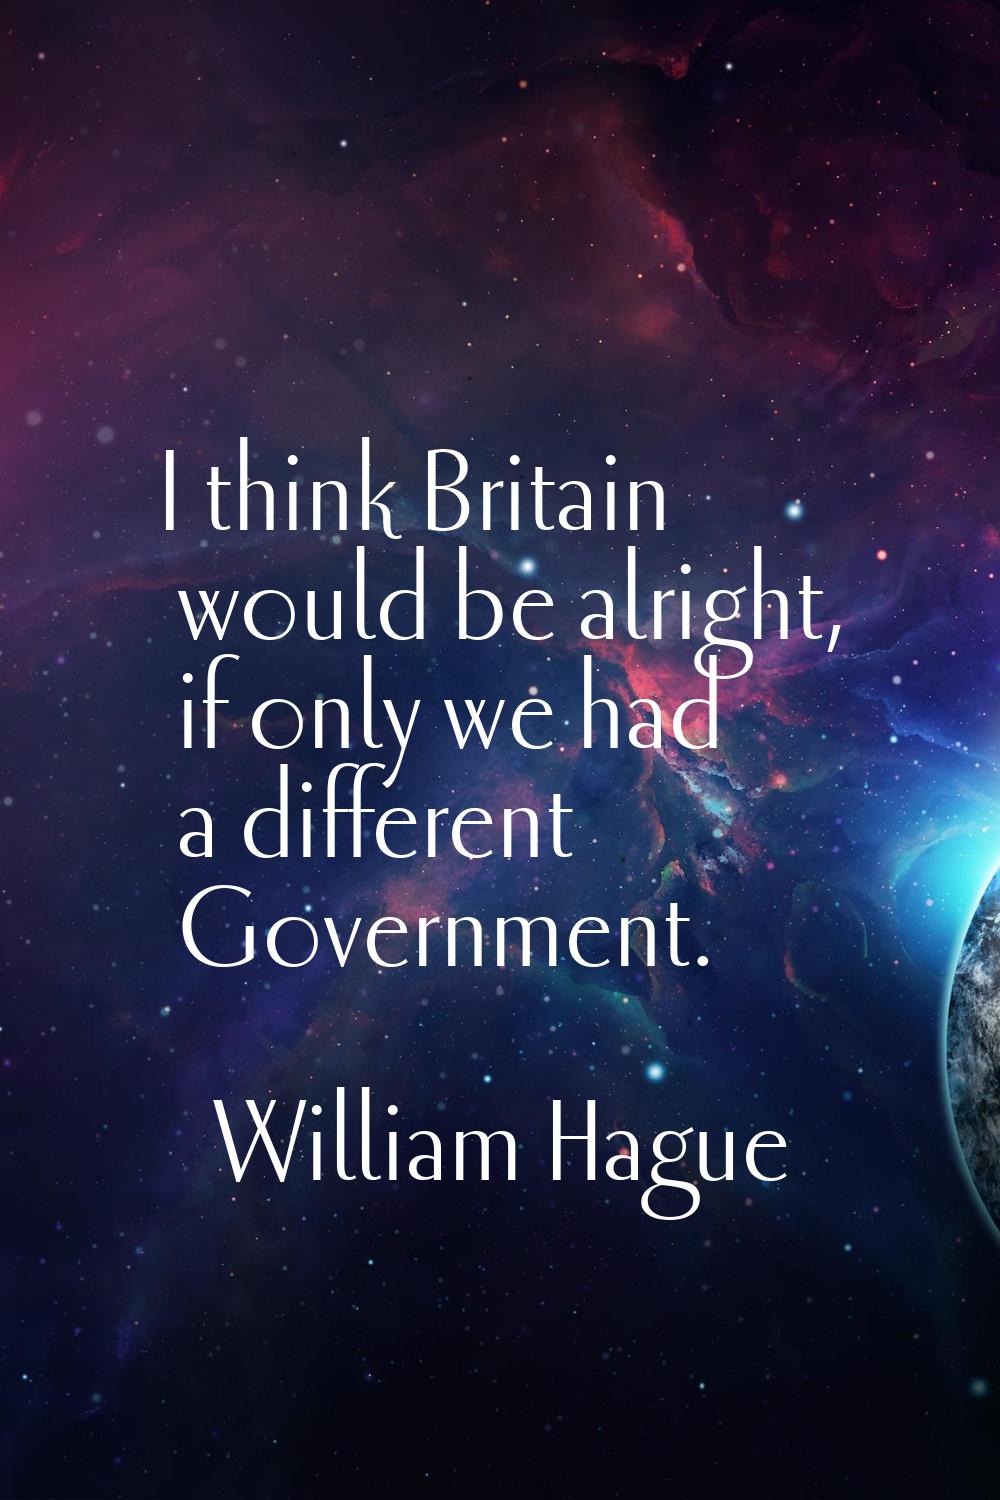 I think Britain would be alright, if only we had a different Government.